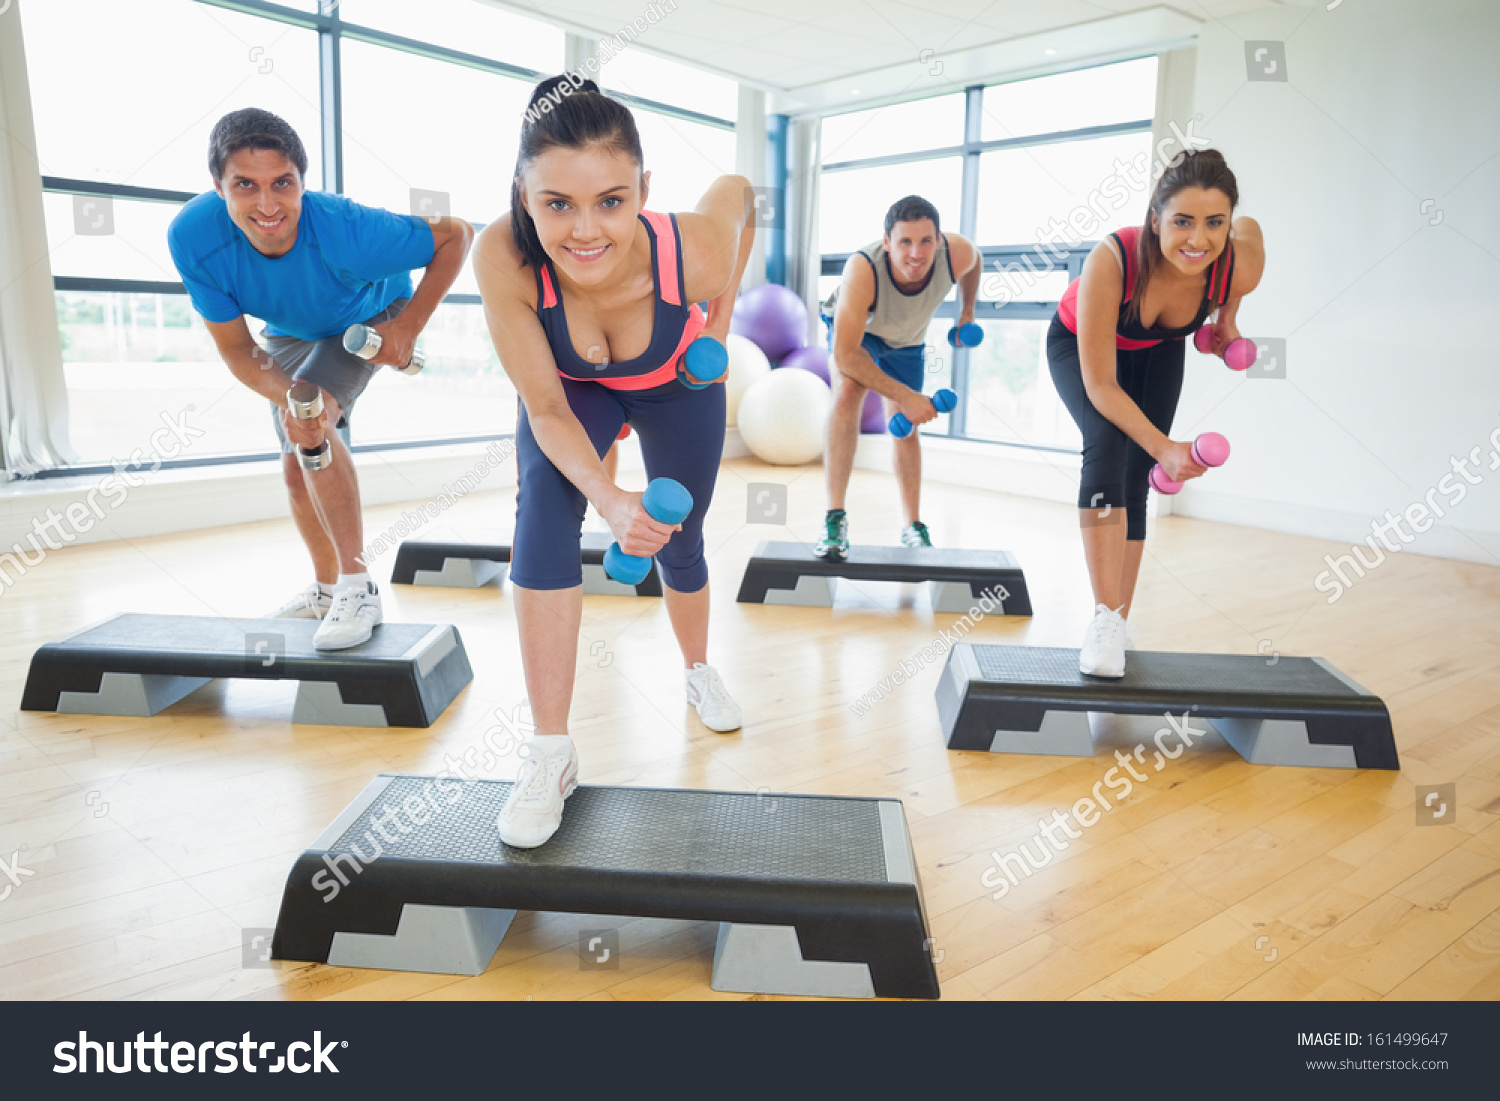 Full length of instructor with fitness class performing step aerobics exercise with dumbbells in a gym #161499647